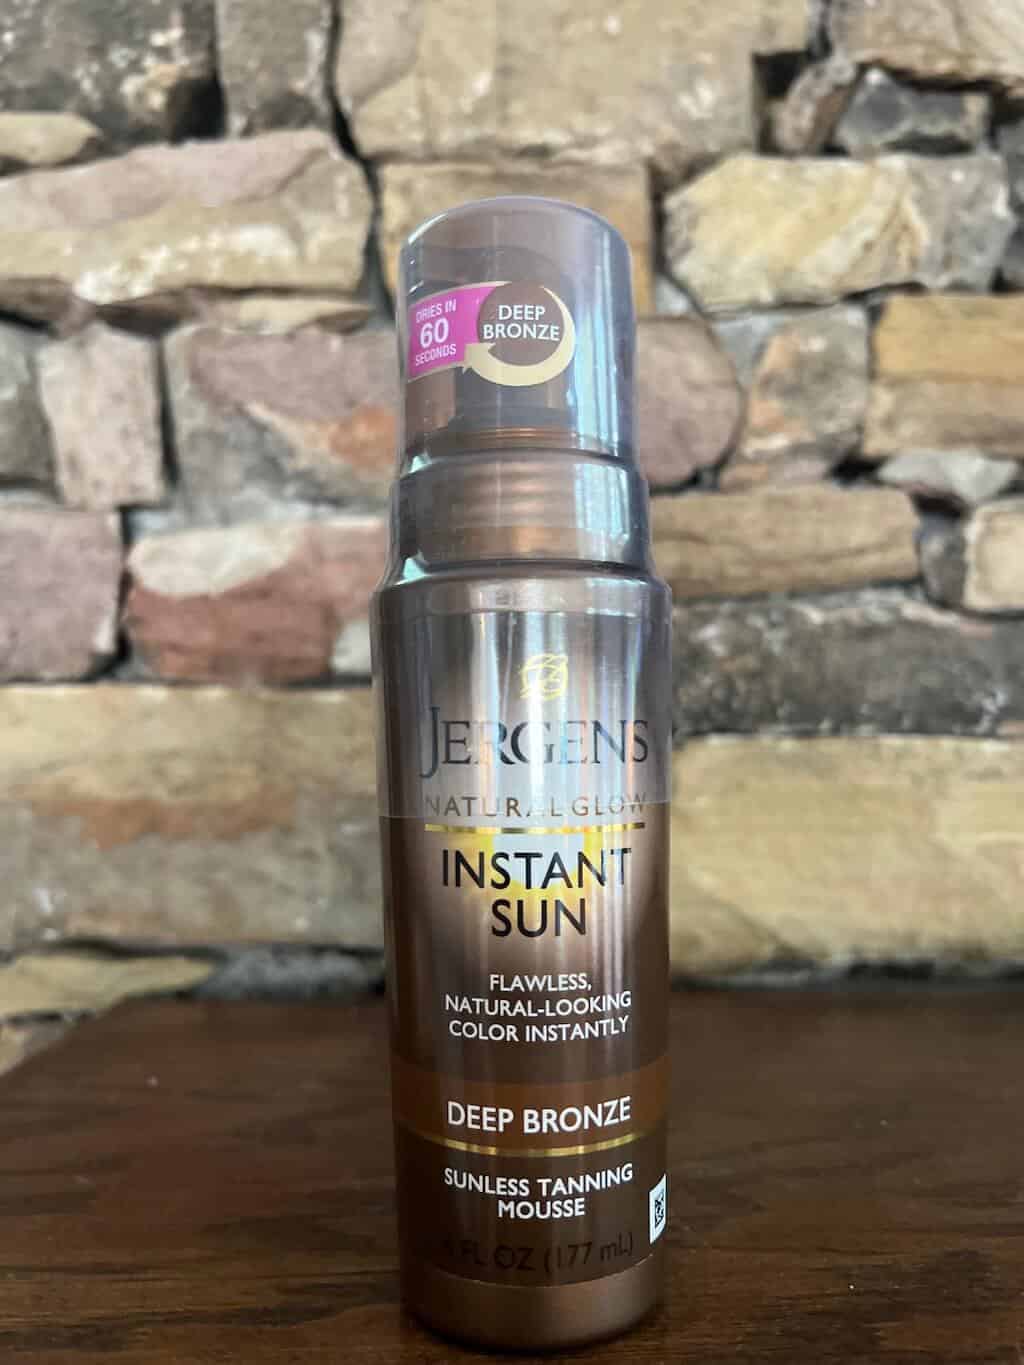 Jergens Natural Glow - Instant Sun flawless tanning mousse